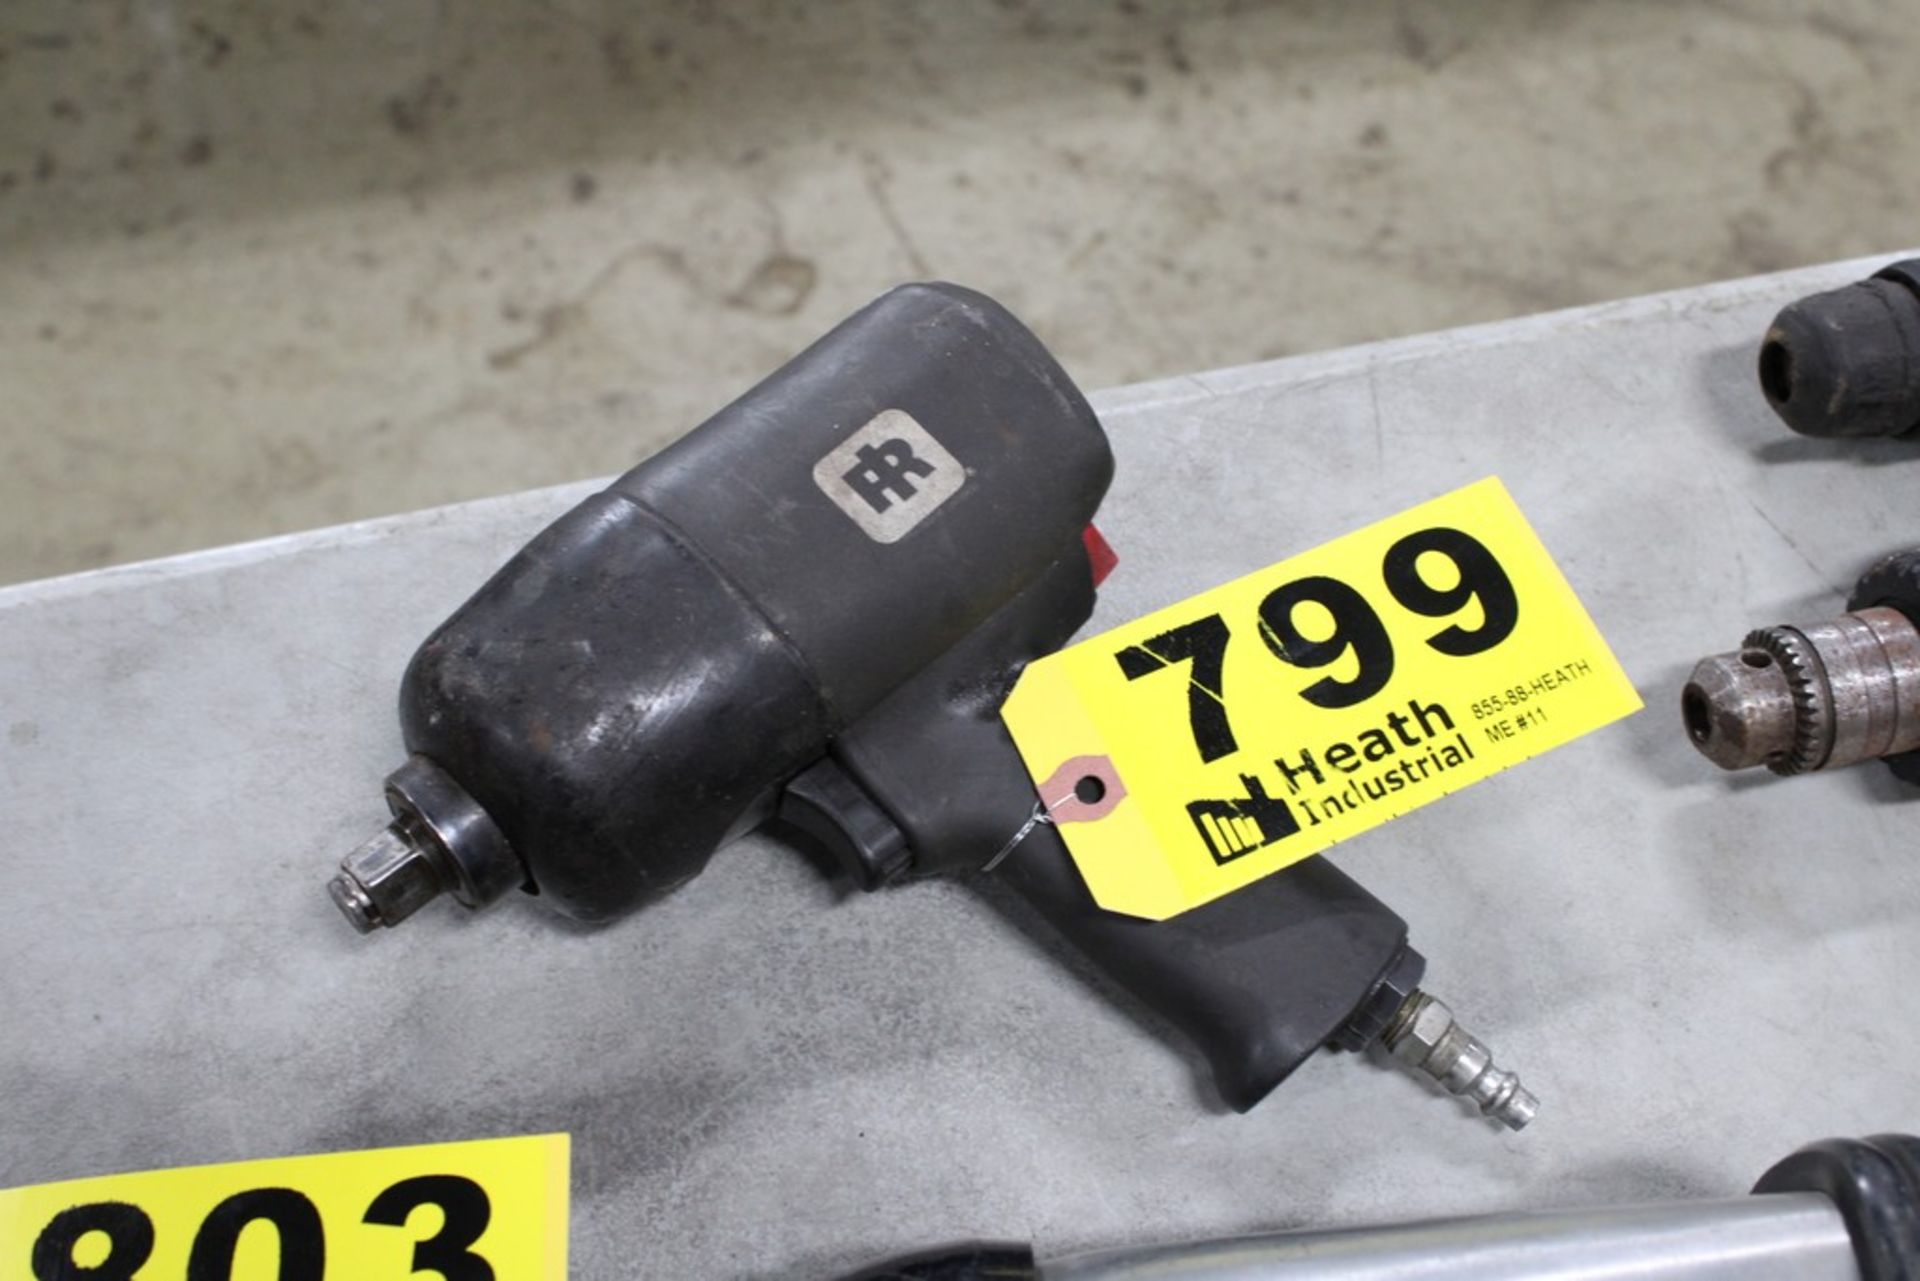 INGERSOLL RAND 1/2" IMPACT WRENCH